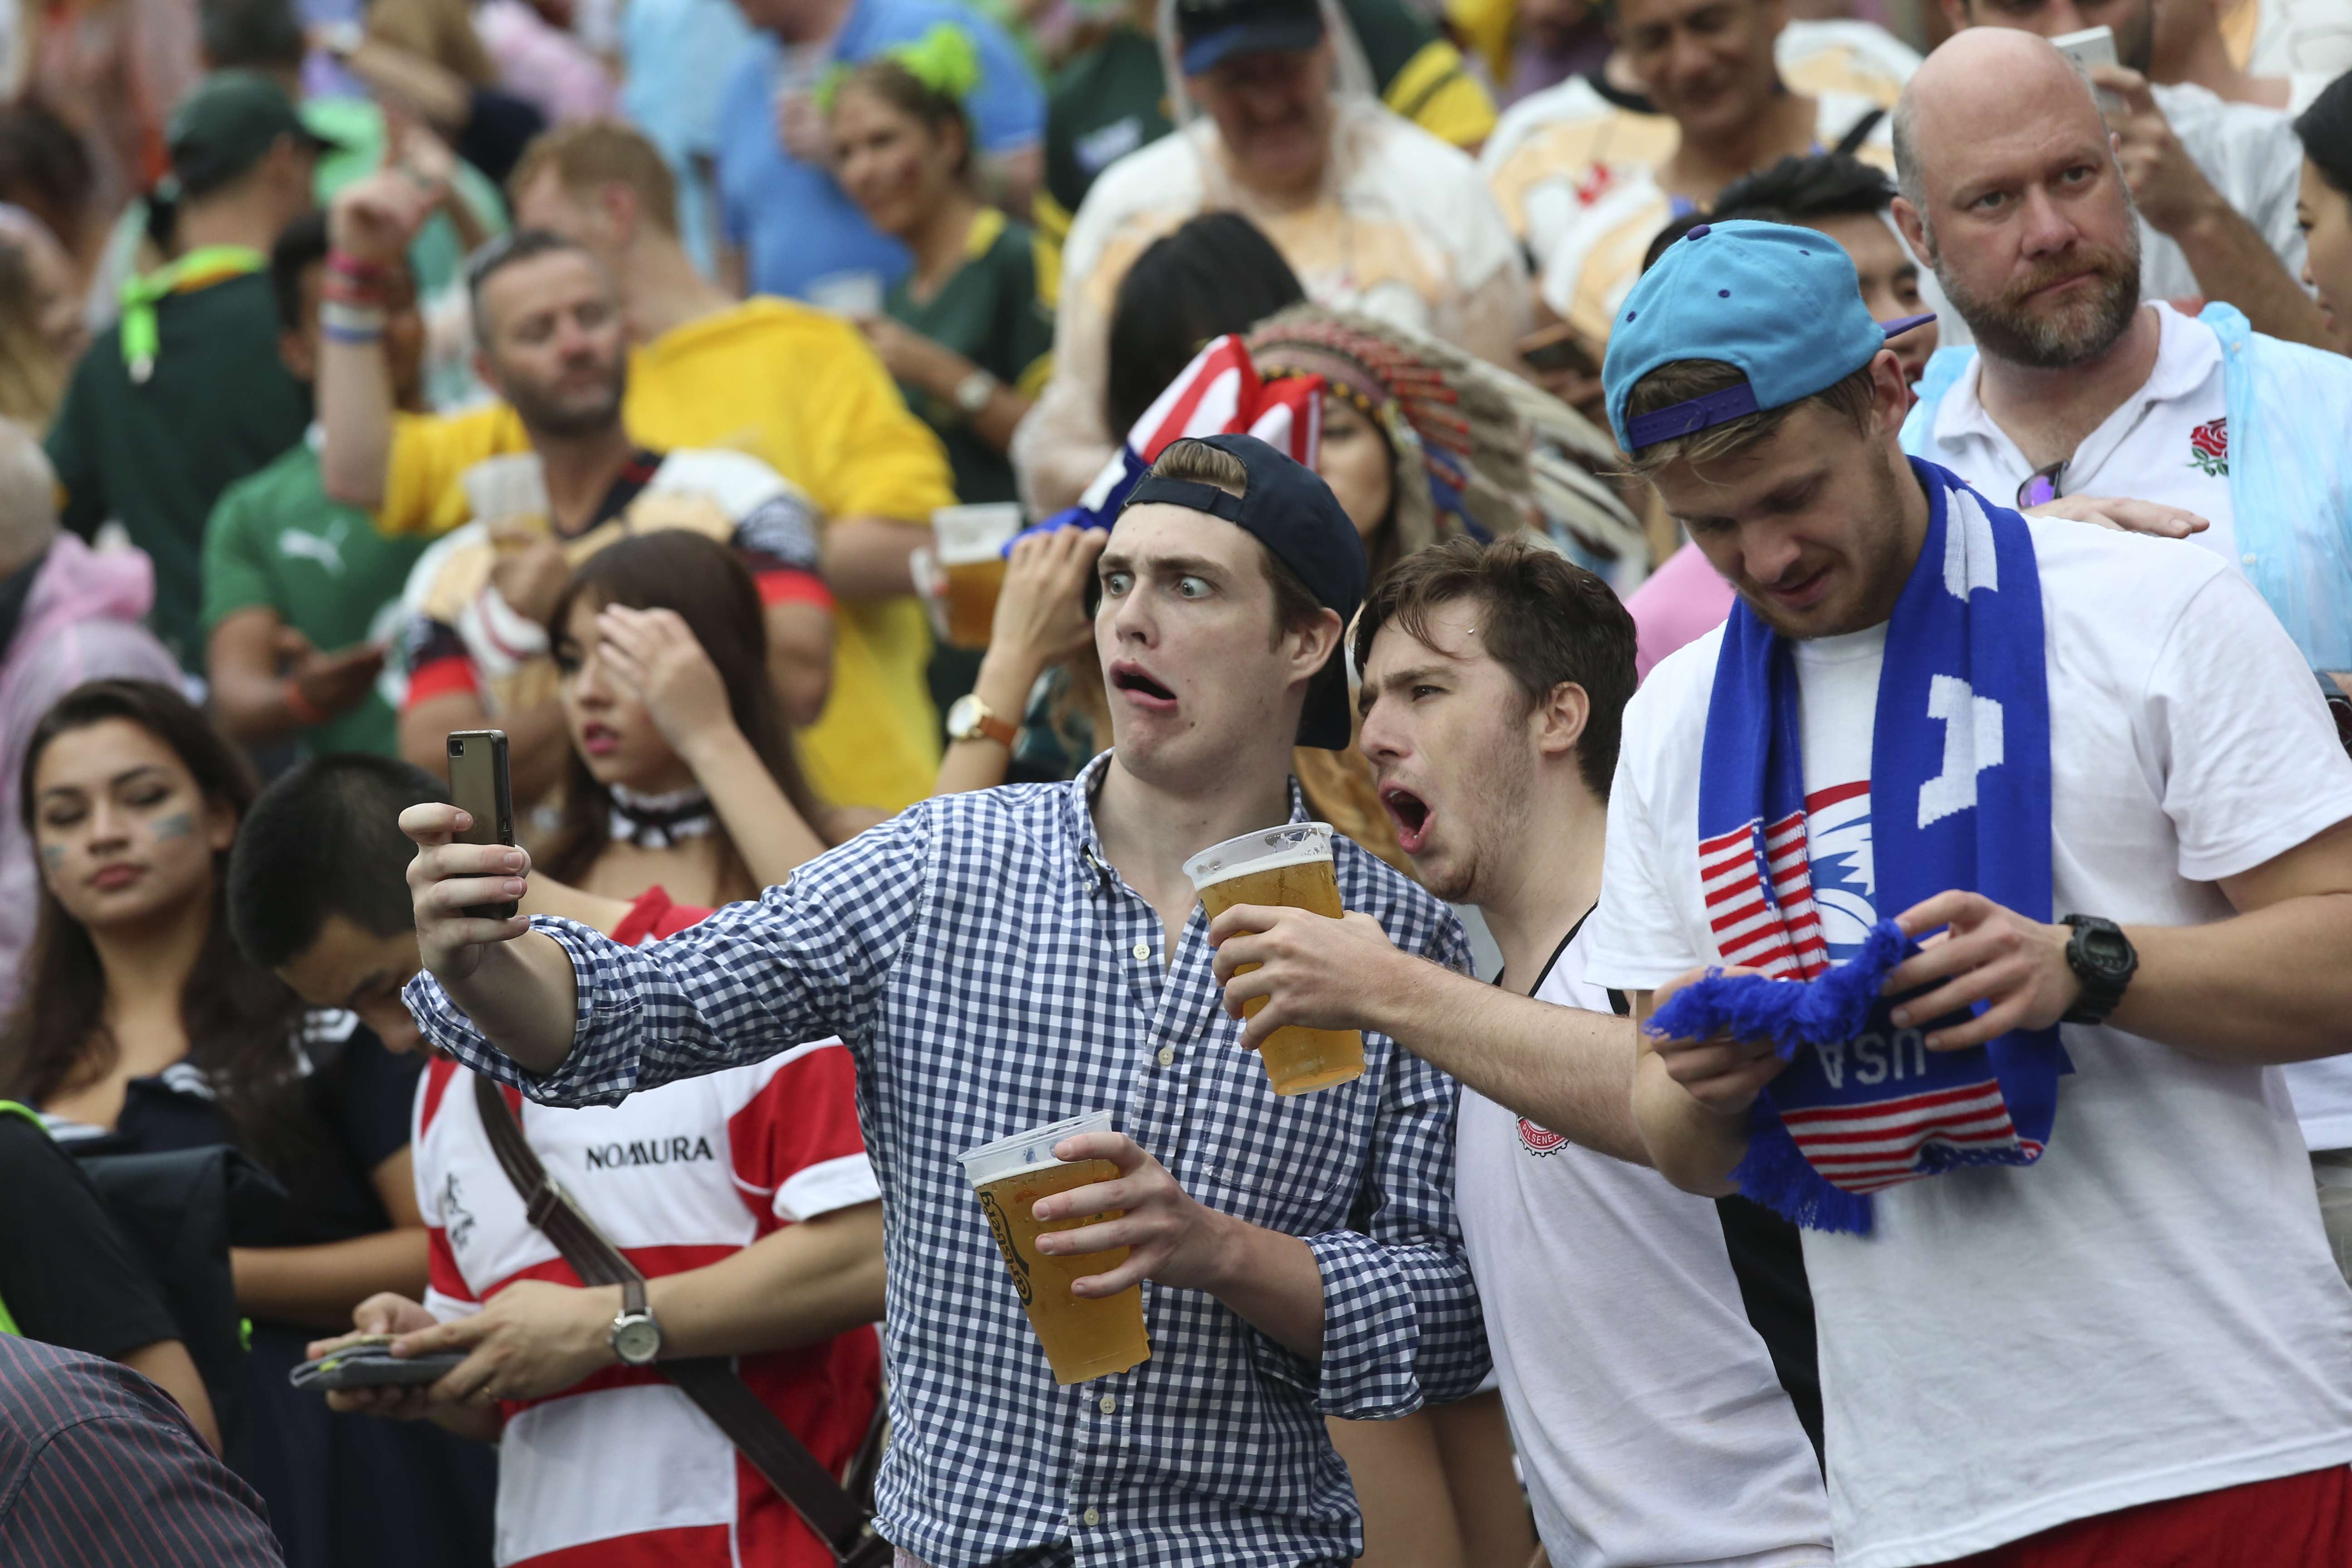 Sevens fans at this year’s event. Photo: SCMP / K.Y Cheng